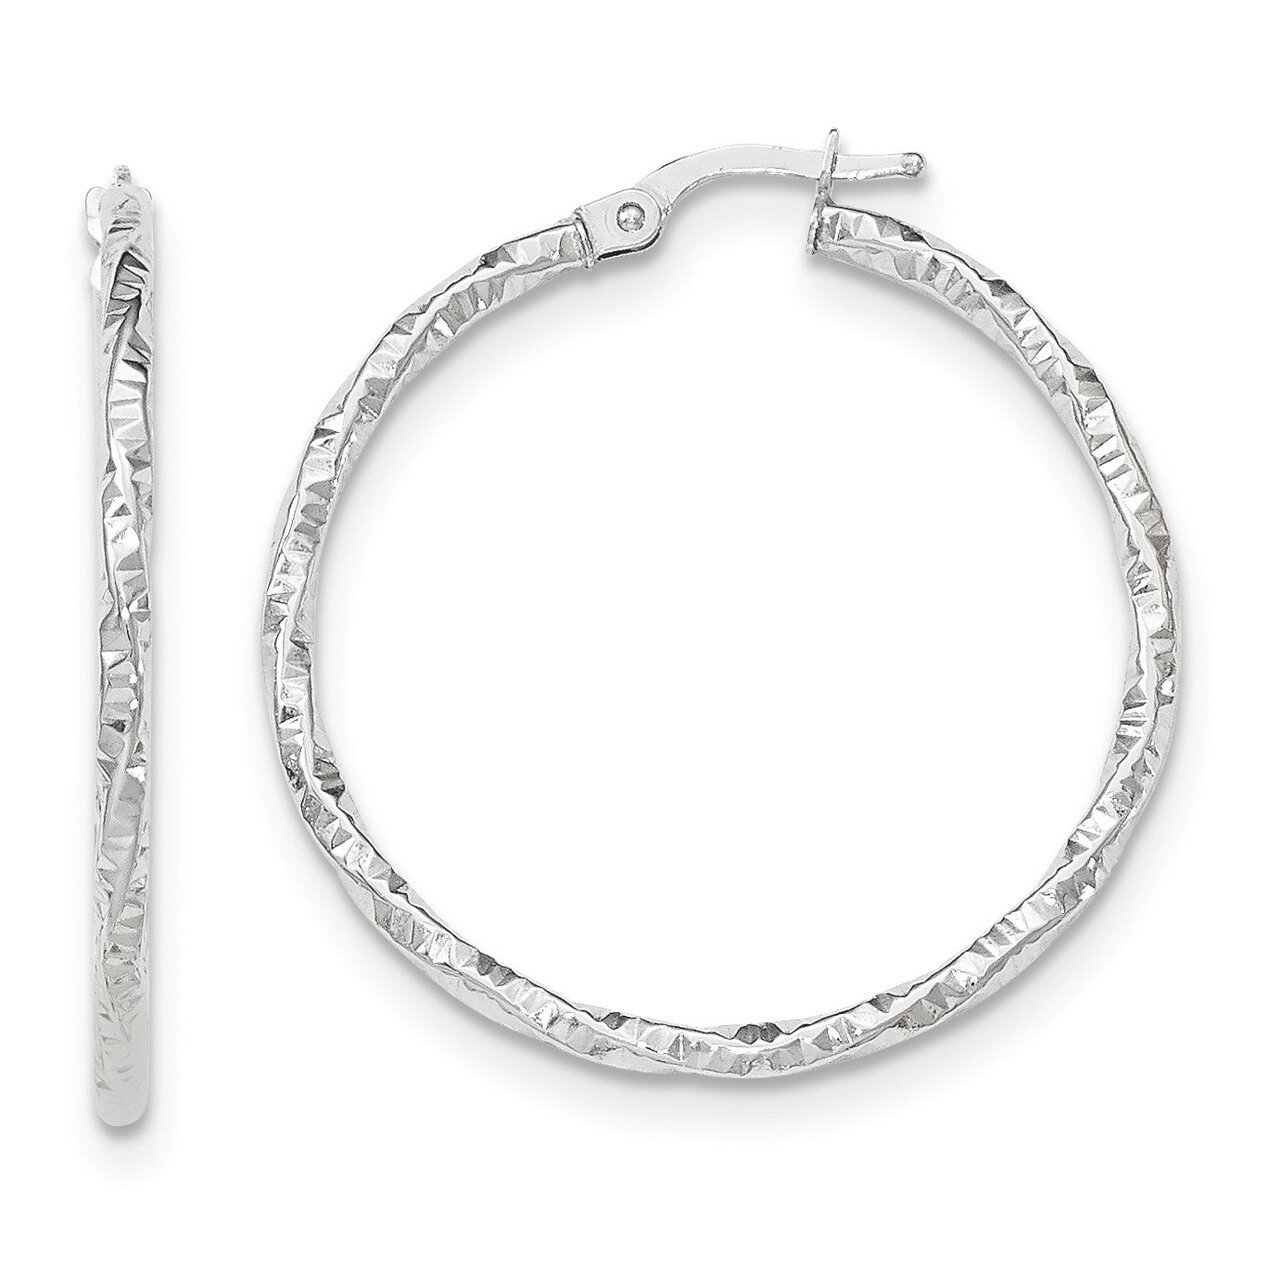 Hoop Earrings 14k White Gold Polished and Textured TH673